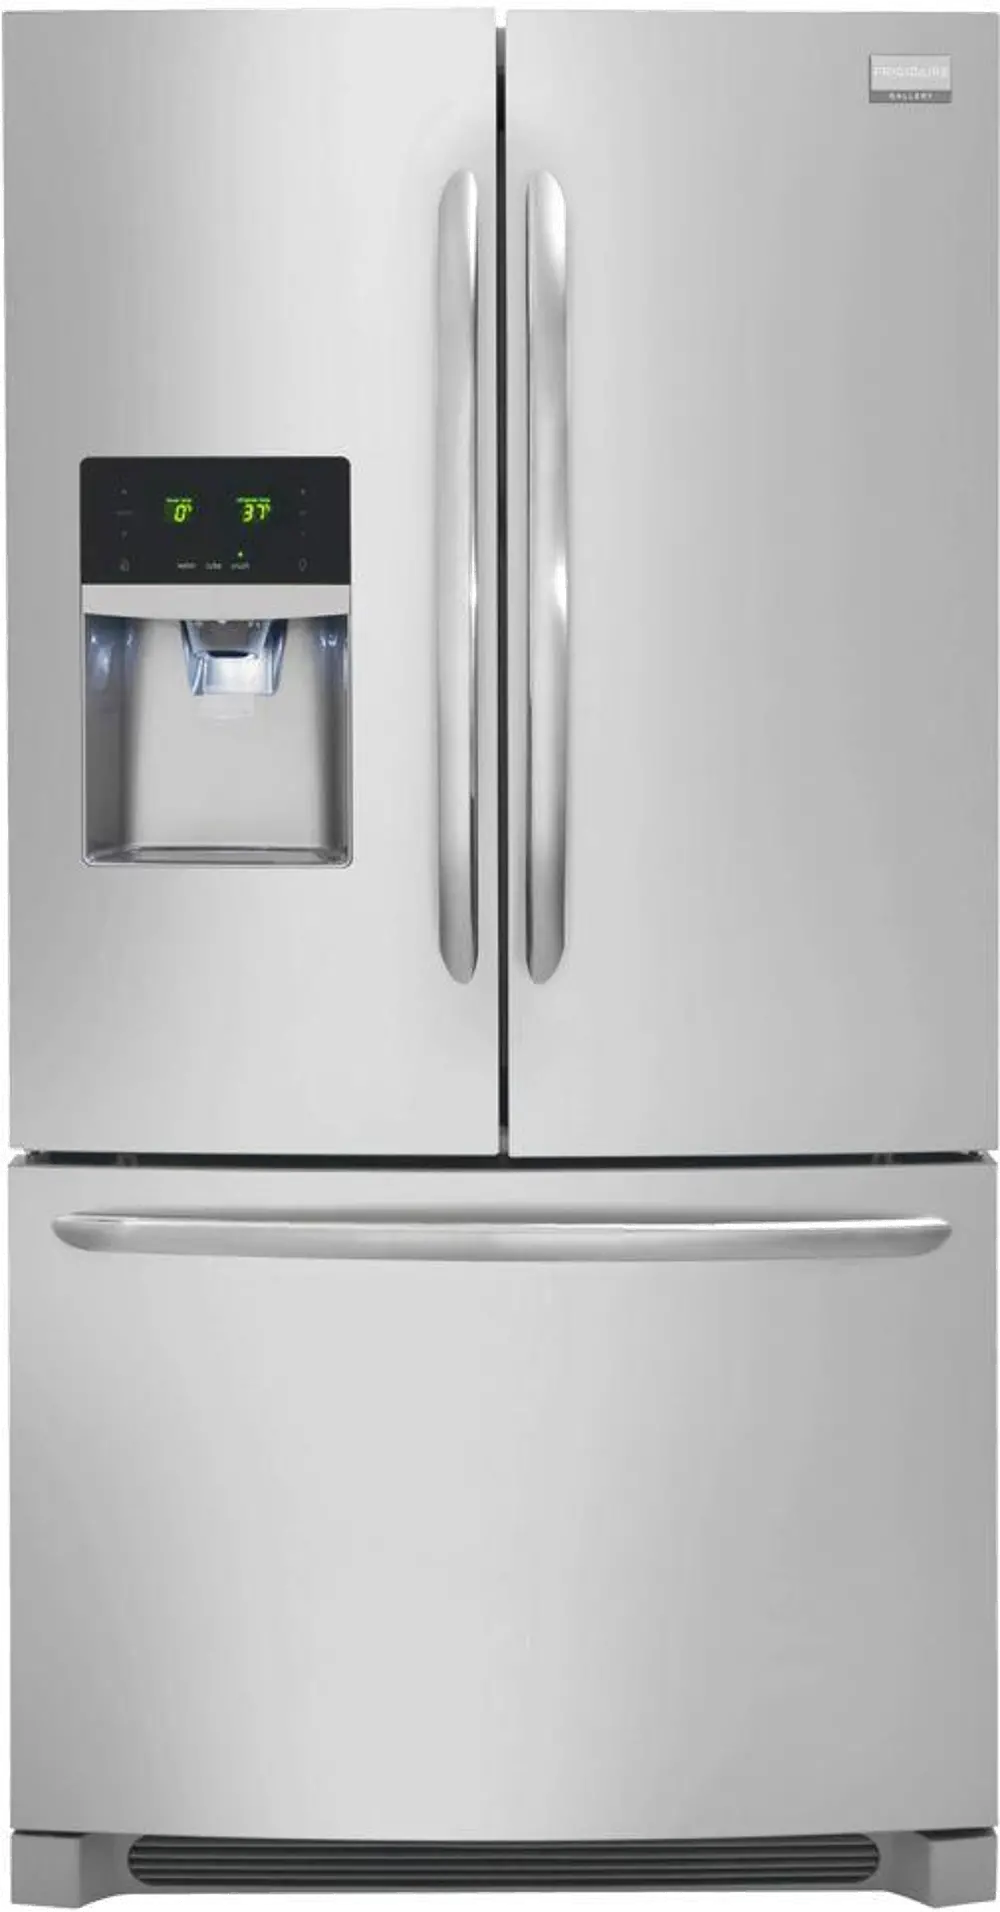 DGHF2360PF Frigidaire French Door Counter Depth Refrigerator - 36 Inch Stainless Steel-1